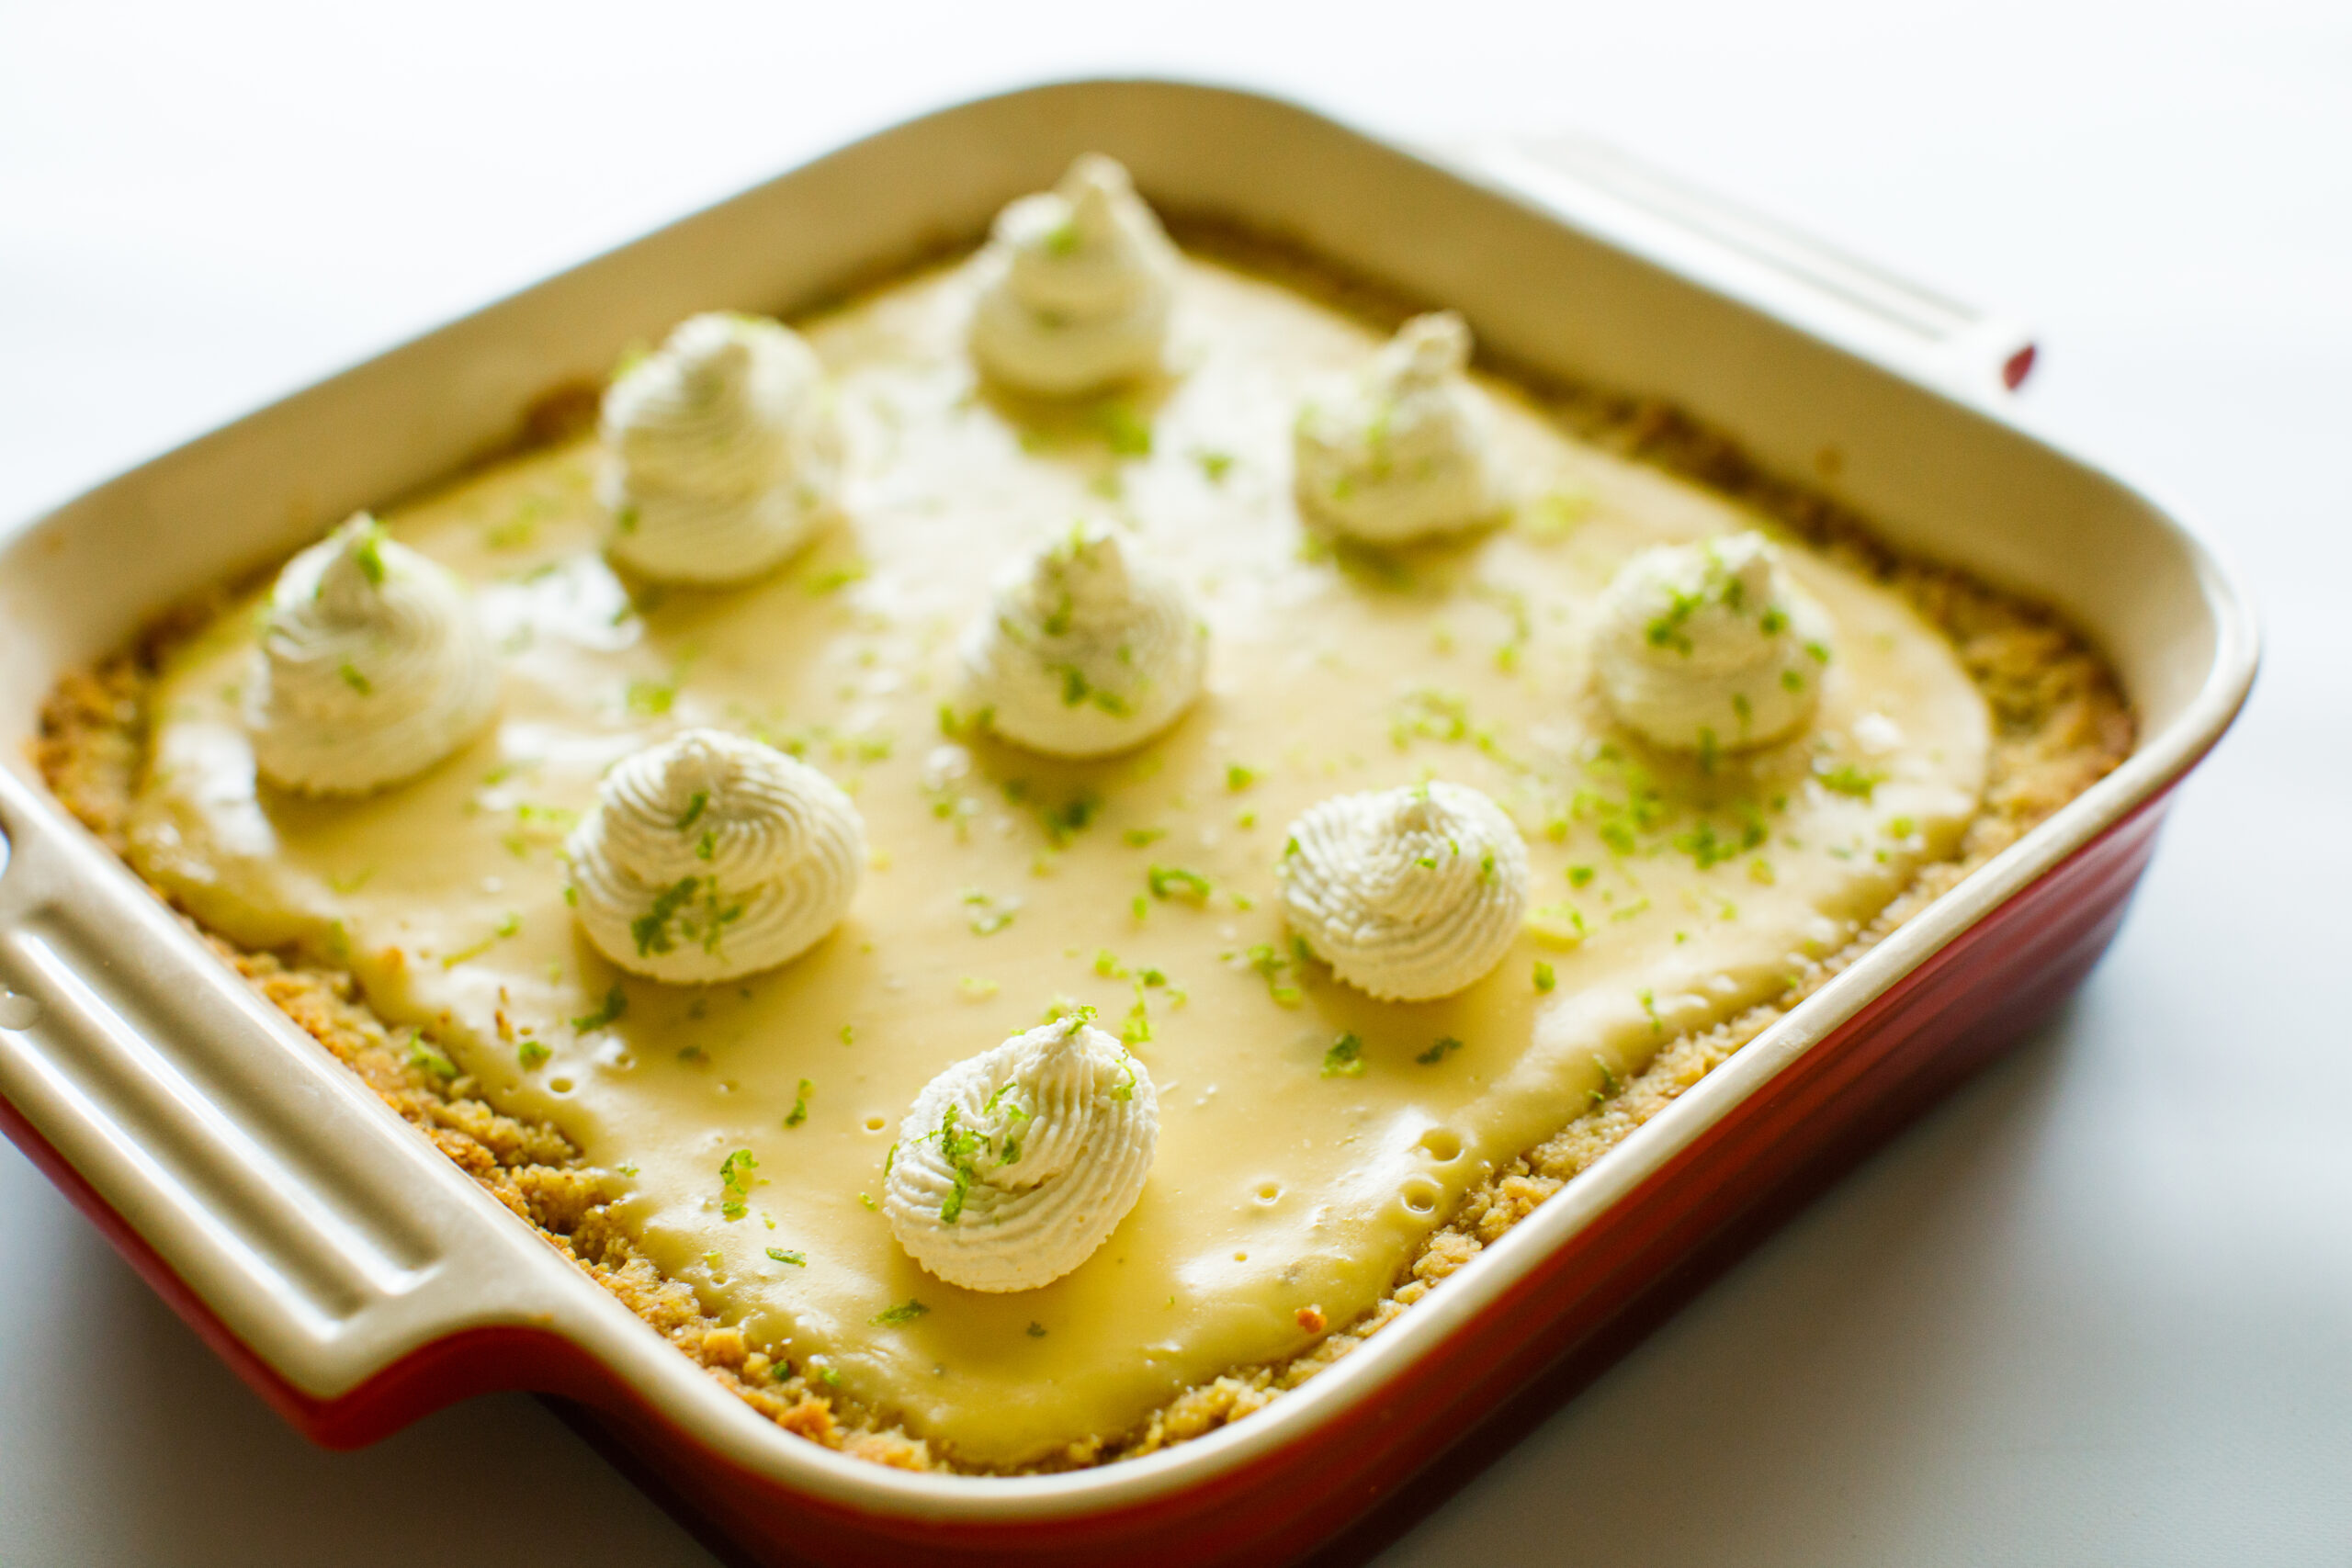 The finished Key Lime Pie Bars in a red baking dish